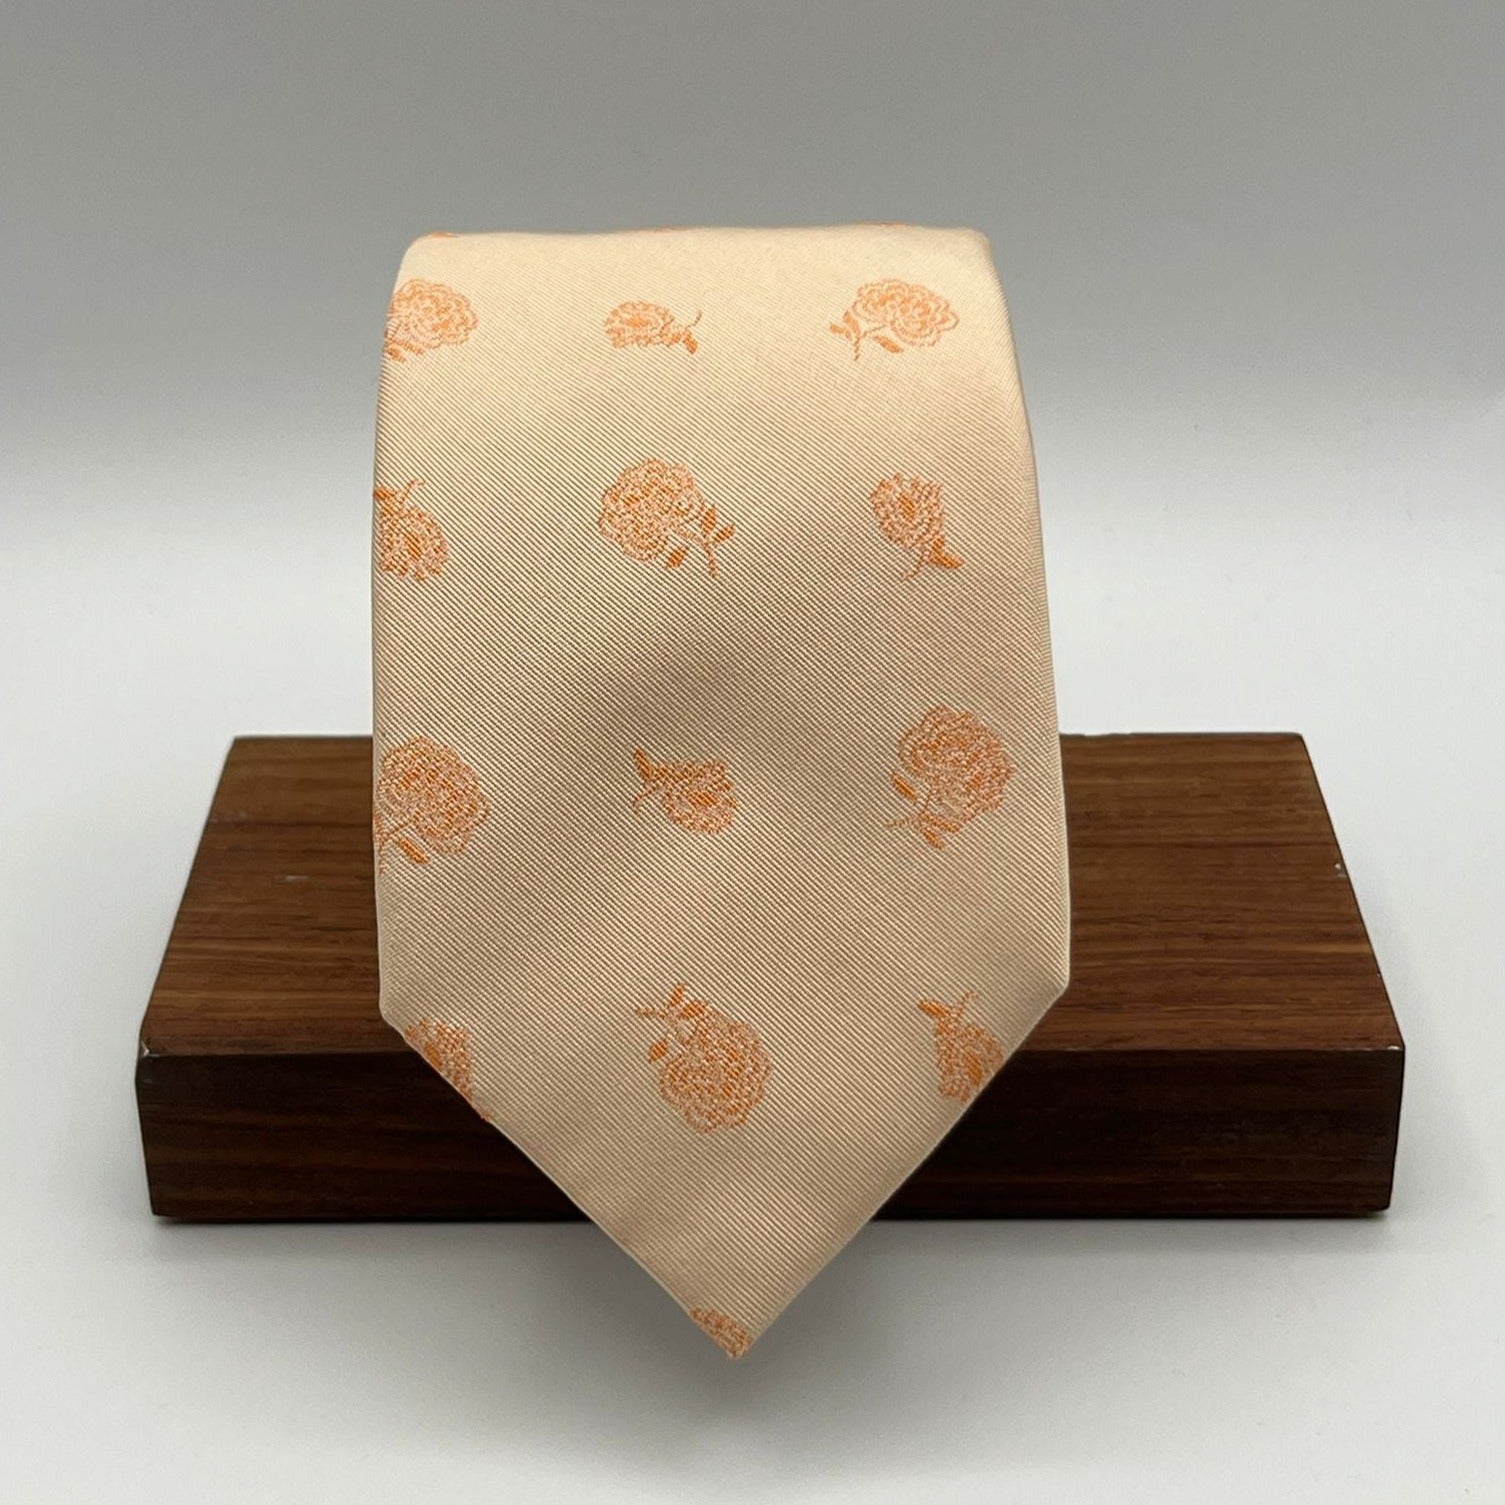 N.O.S. Cruciani & Bella - Silk and Cotton - Light Apricot, Apricot Floral Motif  Tie